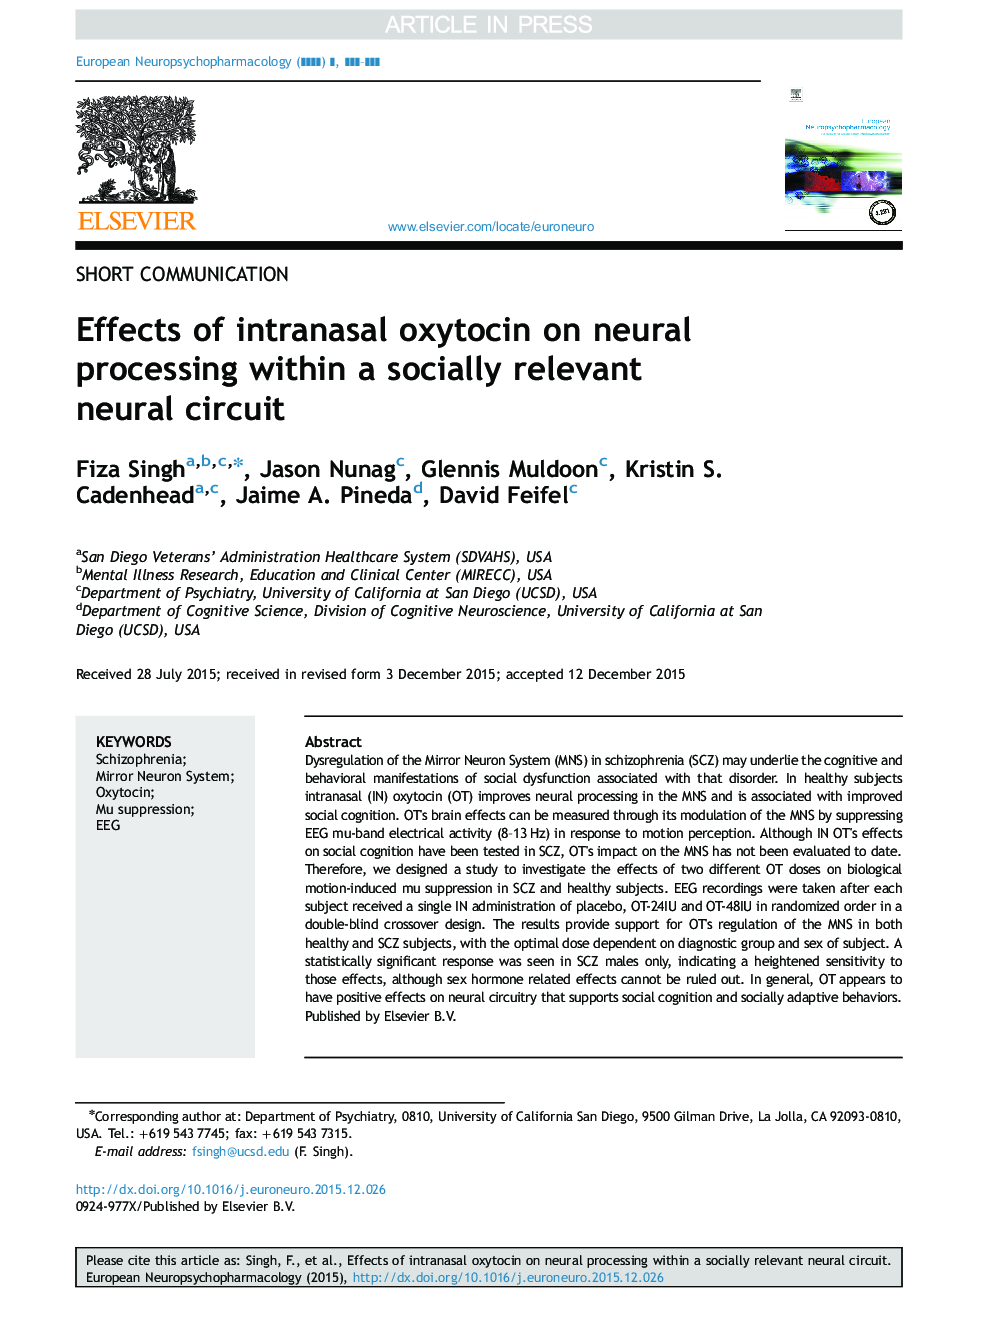 Effects of intranasal oxytocin on neural processing within a socially relevant neural circuit